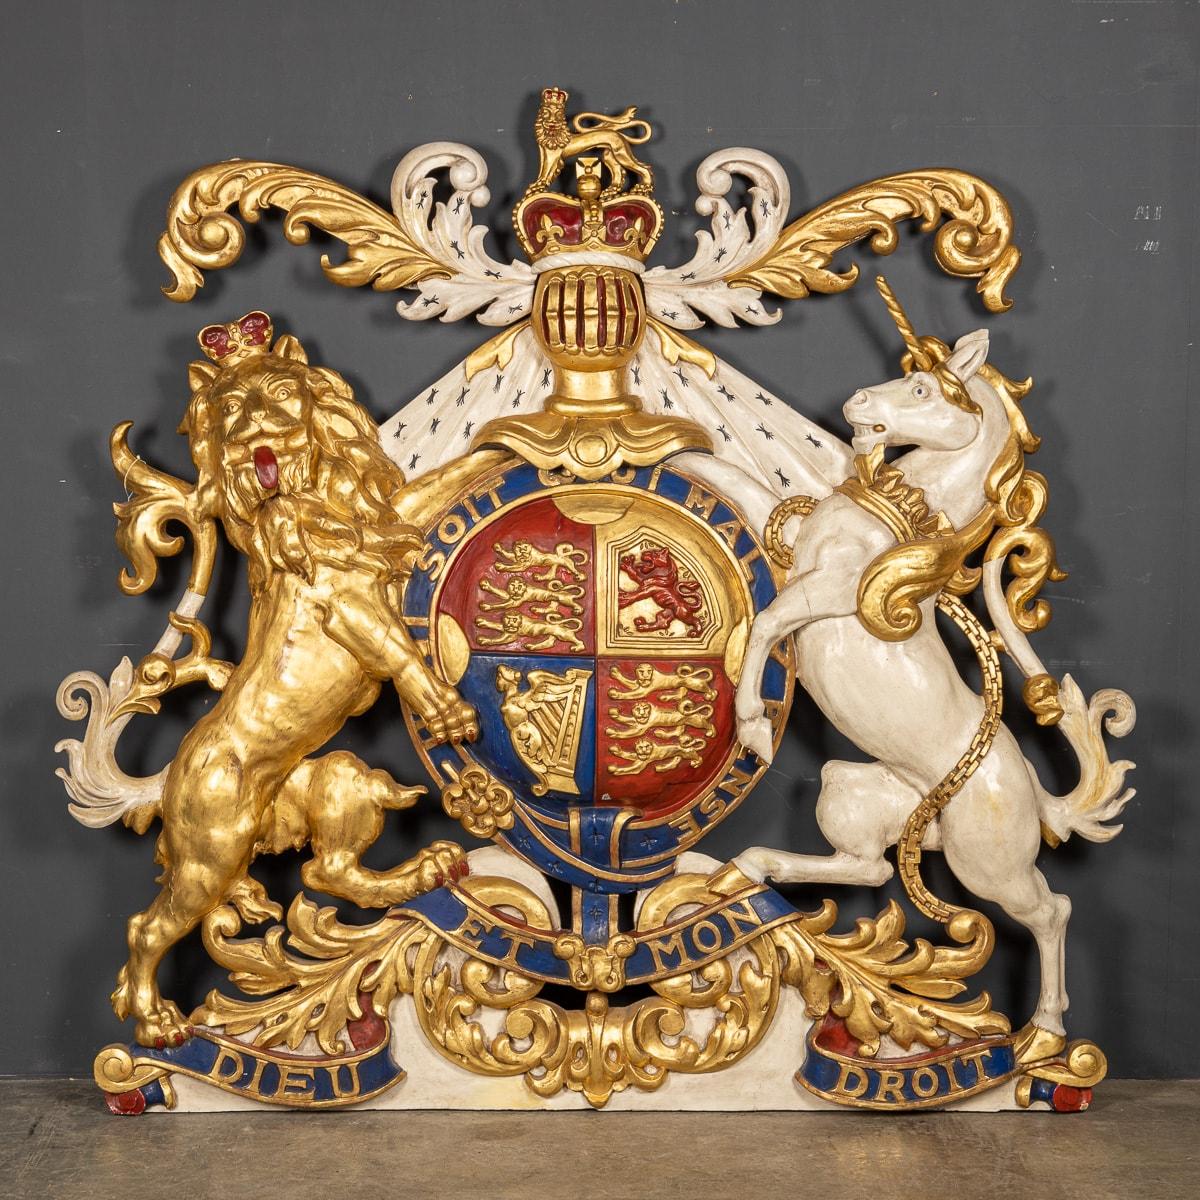 Antique mid 19th Century Victorian large and impressive, beautifully hand painted, carved wooden English Royal crest used in a court or government building around the year 1860. An incredible piece of history and a very decorative conversation piece